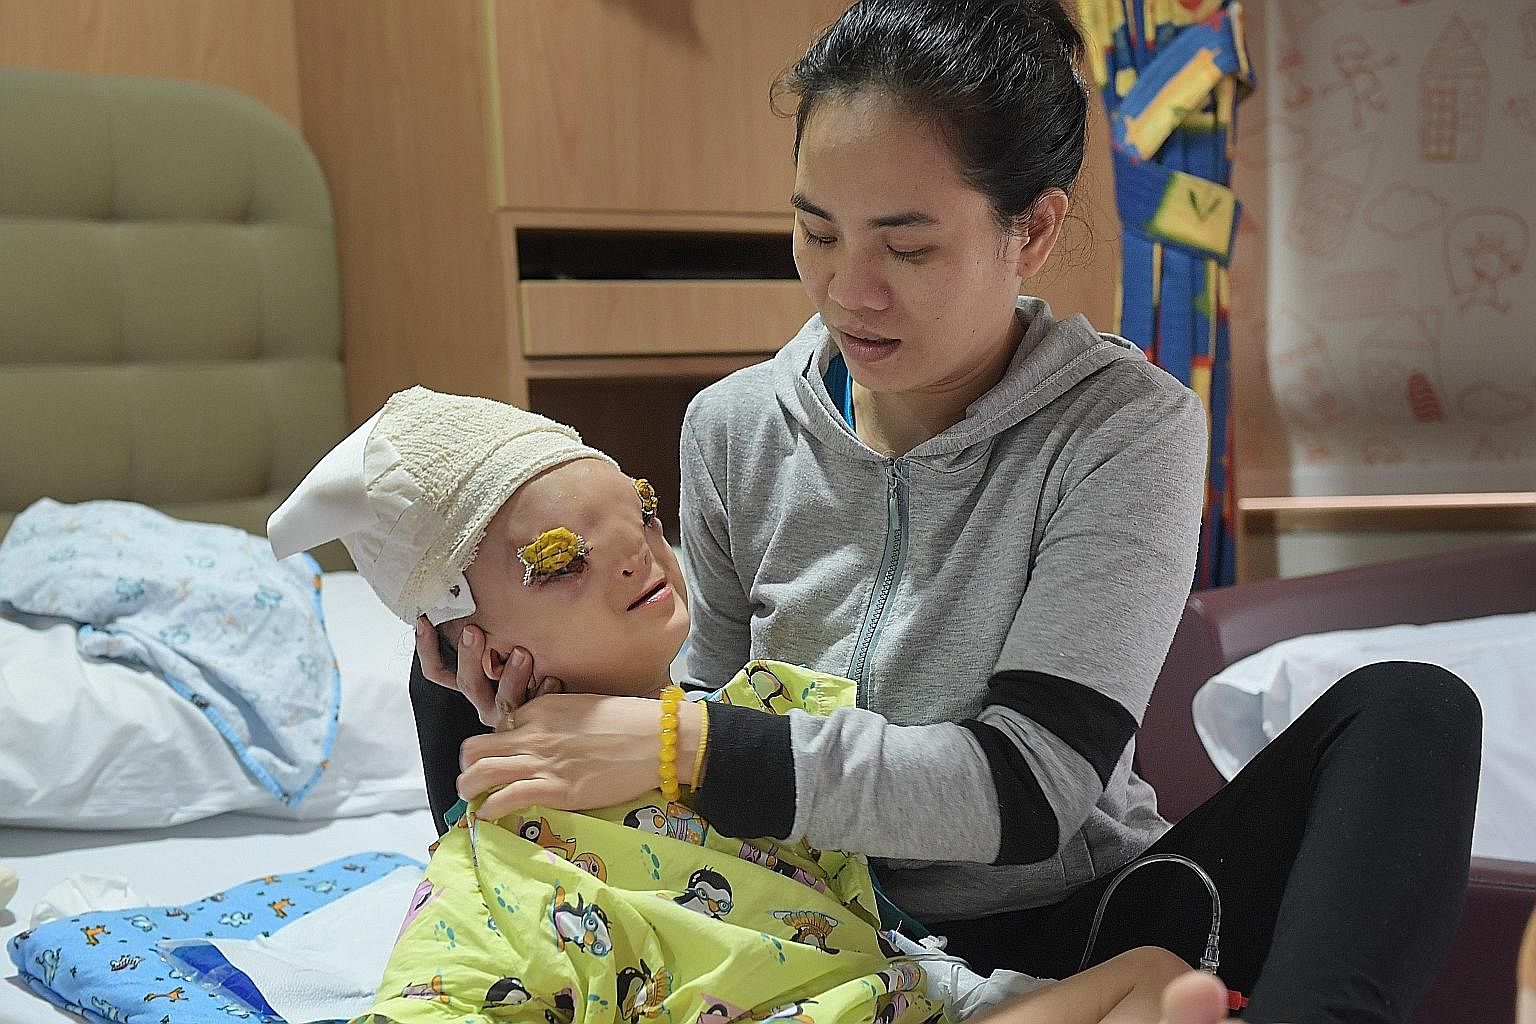 Ton Nu Hoang Dung, seen here after surgery with her mother, Madam Hoang Thi Thuy Linh, was born with a rare deformity where a part of her brain protrudes from a gap in her skull into her face, pushing down her eyes. The medical team took on the case 